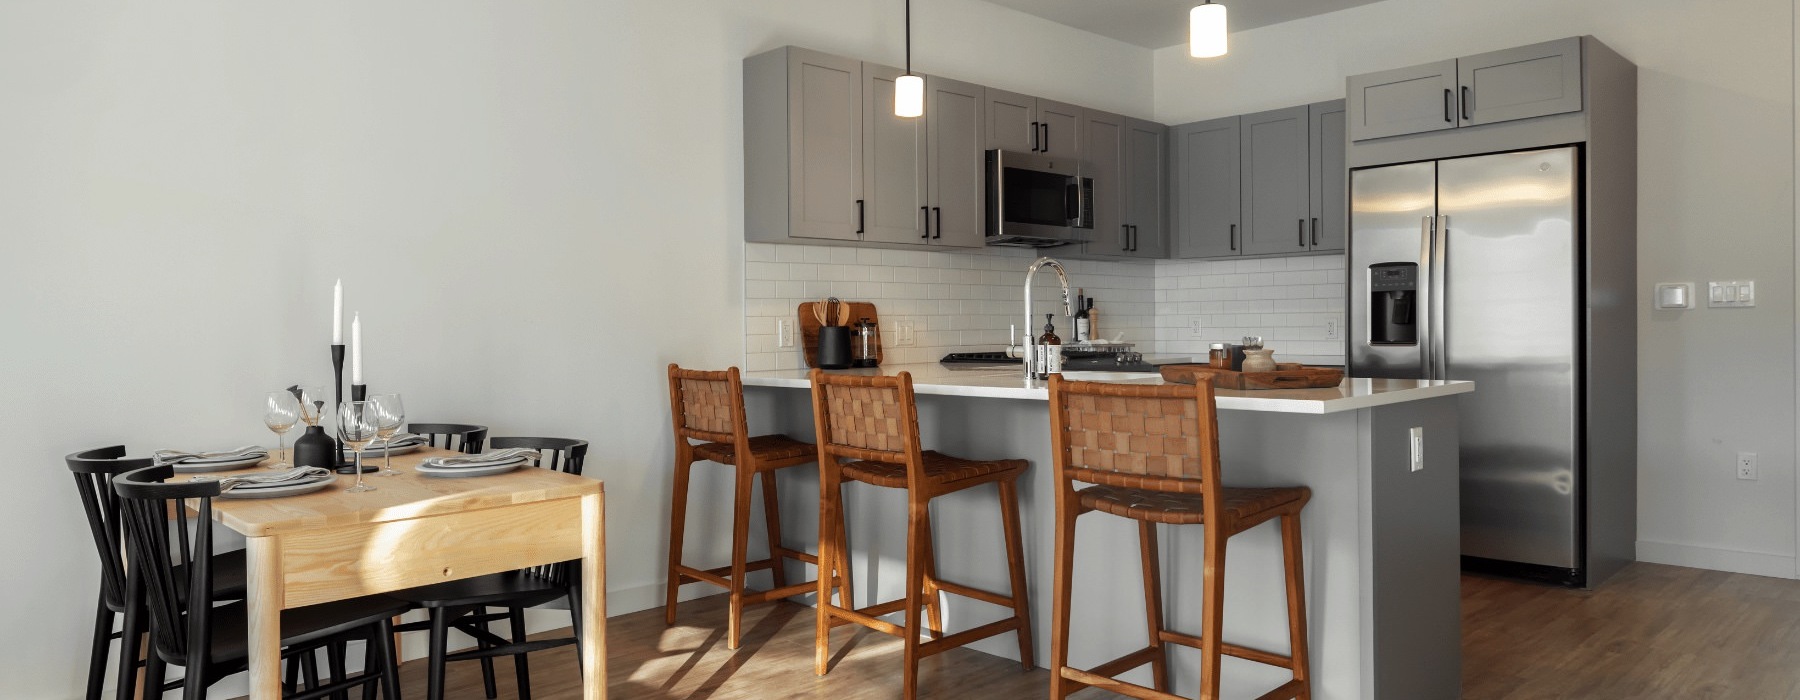 Model kitchen at our apartments in Darien, featuring wood grain floor paneling and stainless steel appliances.